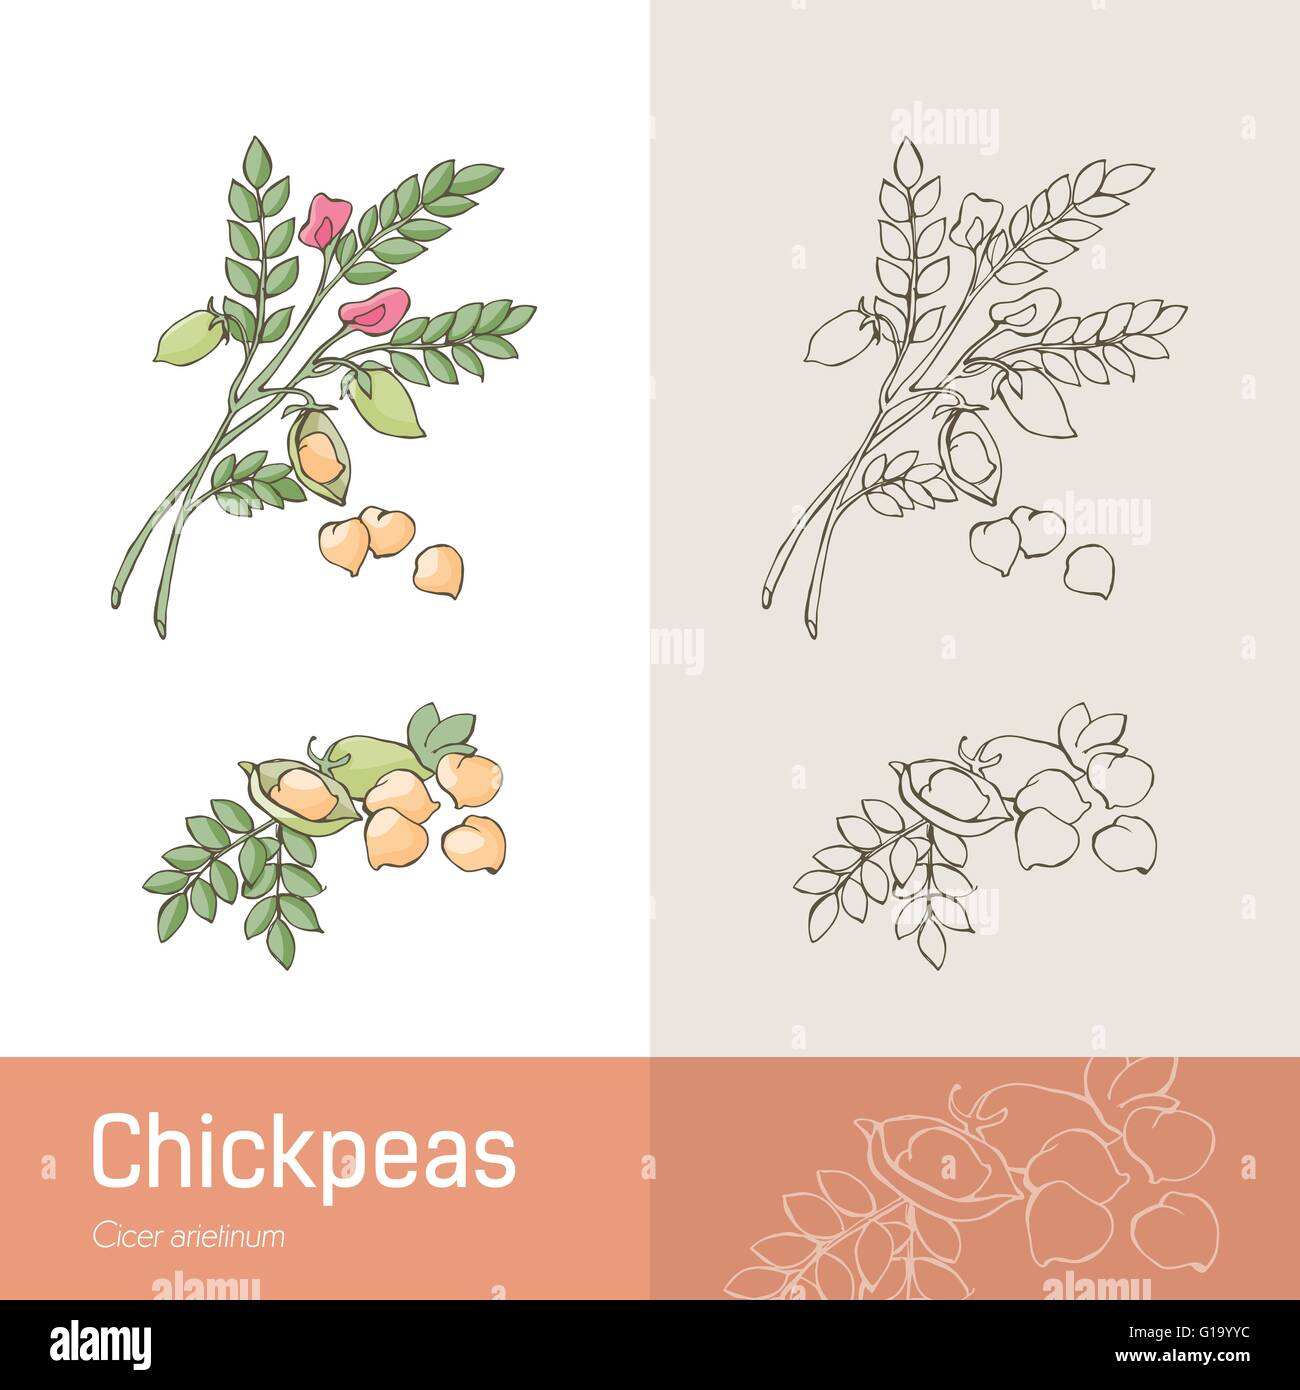 Hand drawn chickpeas with plant, beans and flower Stock Vector